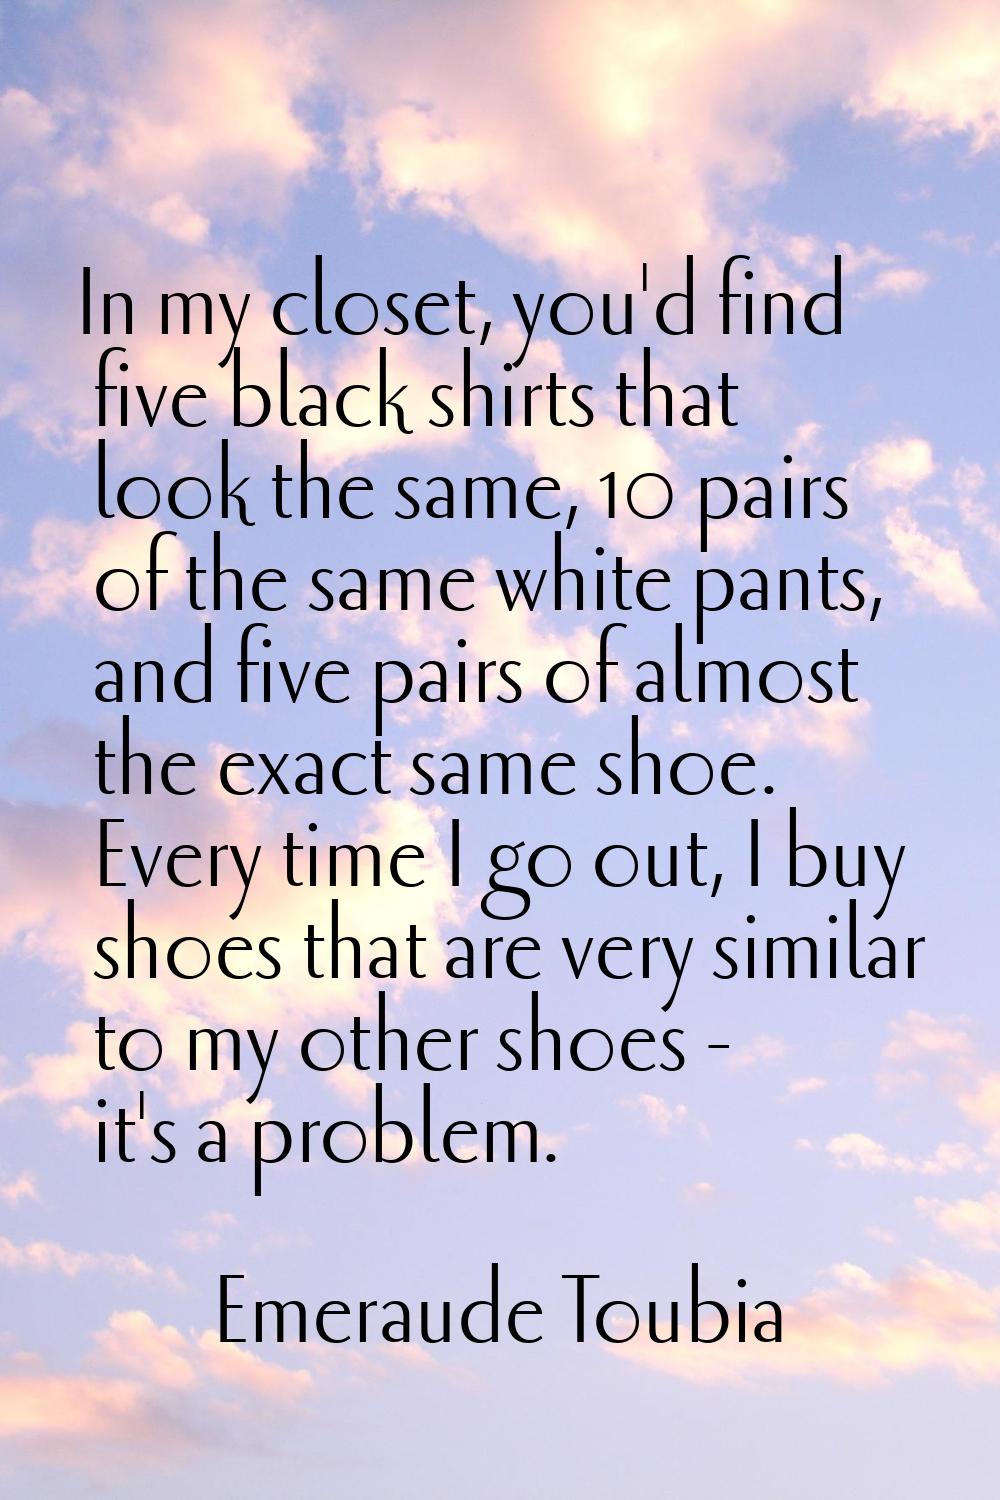 In my closet, you'd find five black shirts that look the same, 10 pairs of the same white pants, an